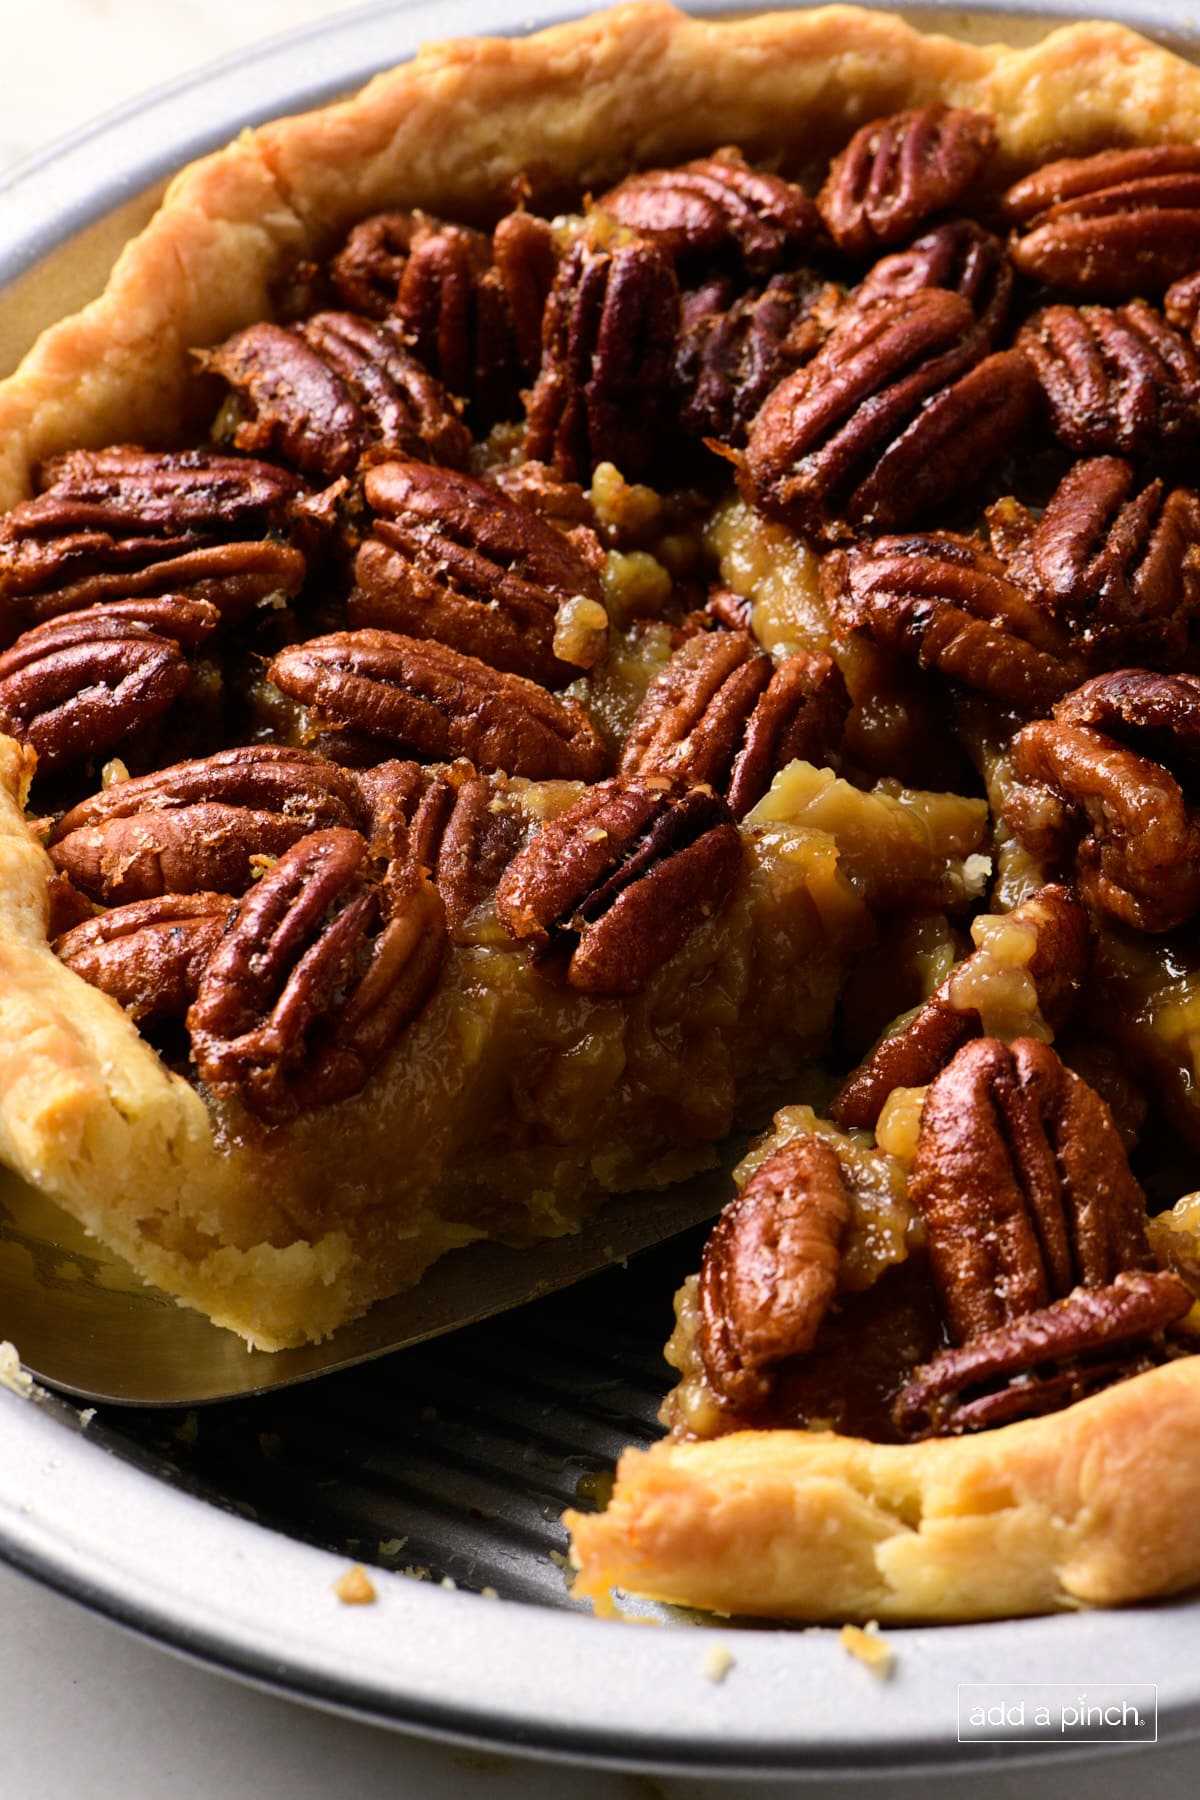 Pecan pie that has one slice removed.